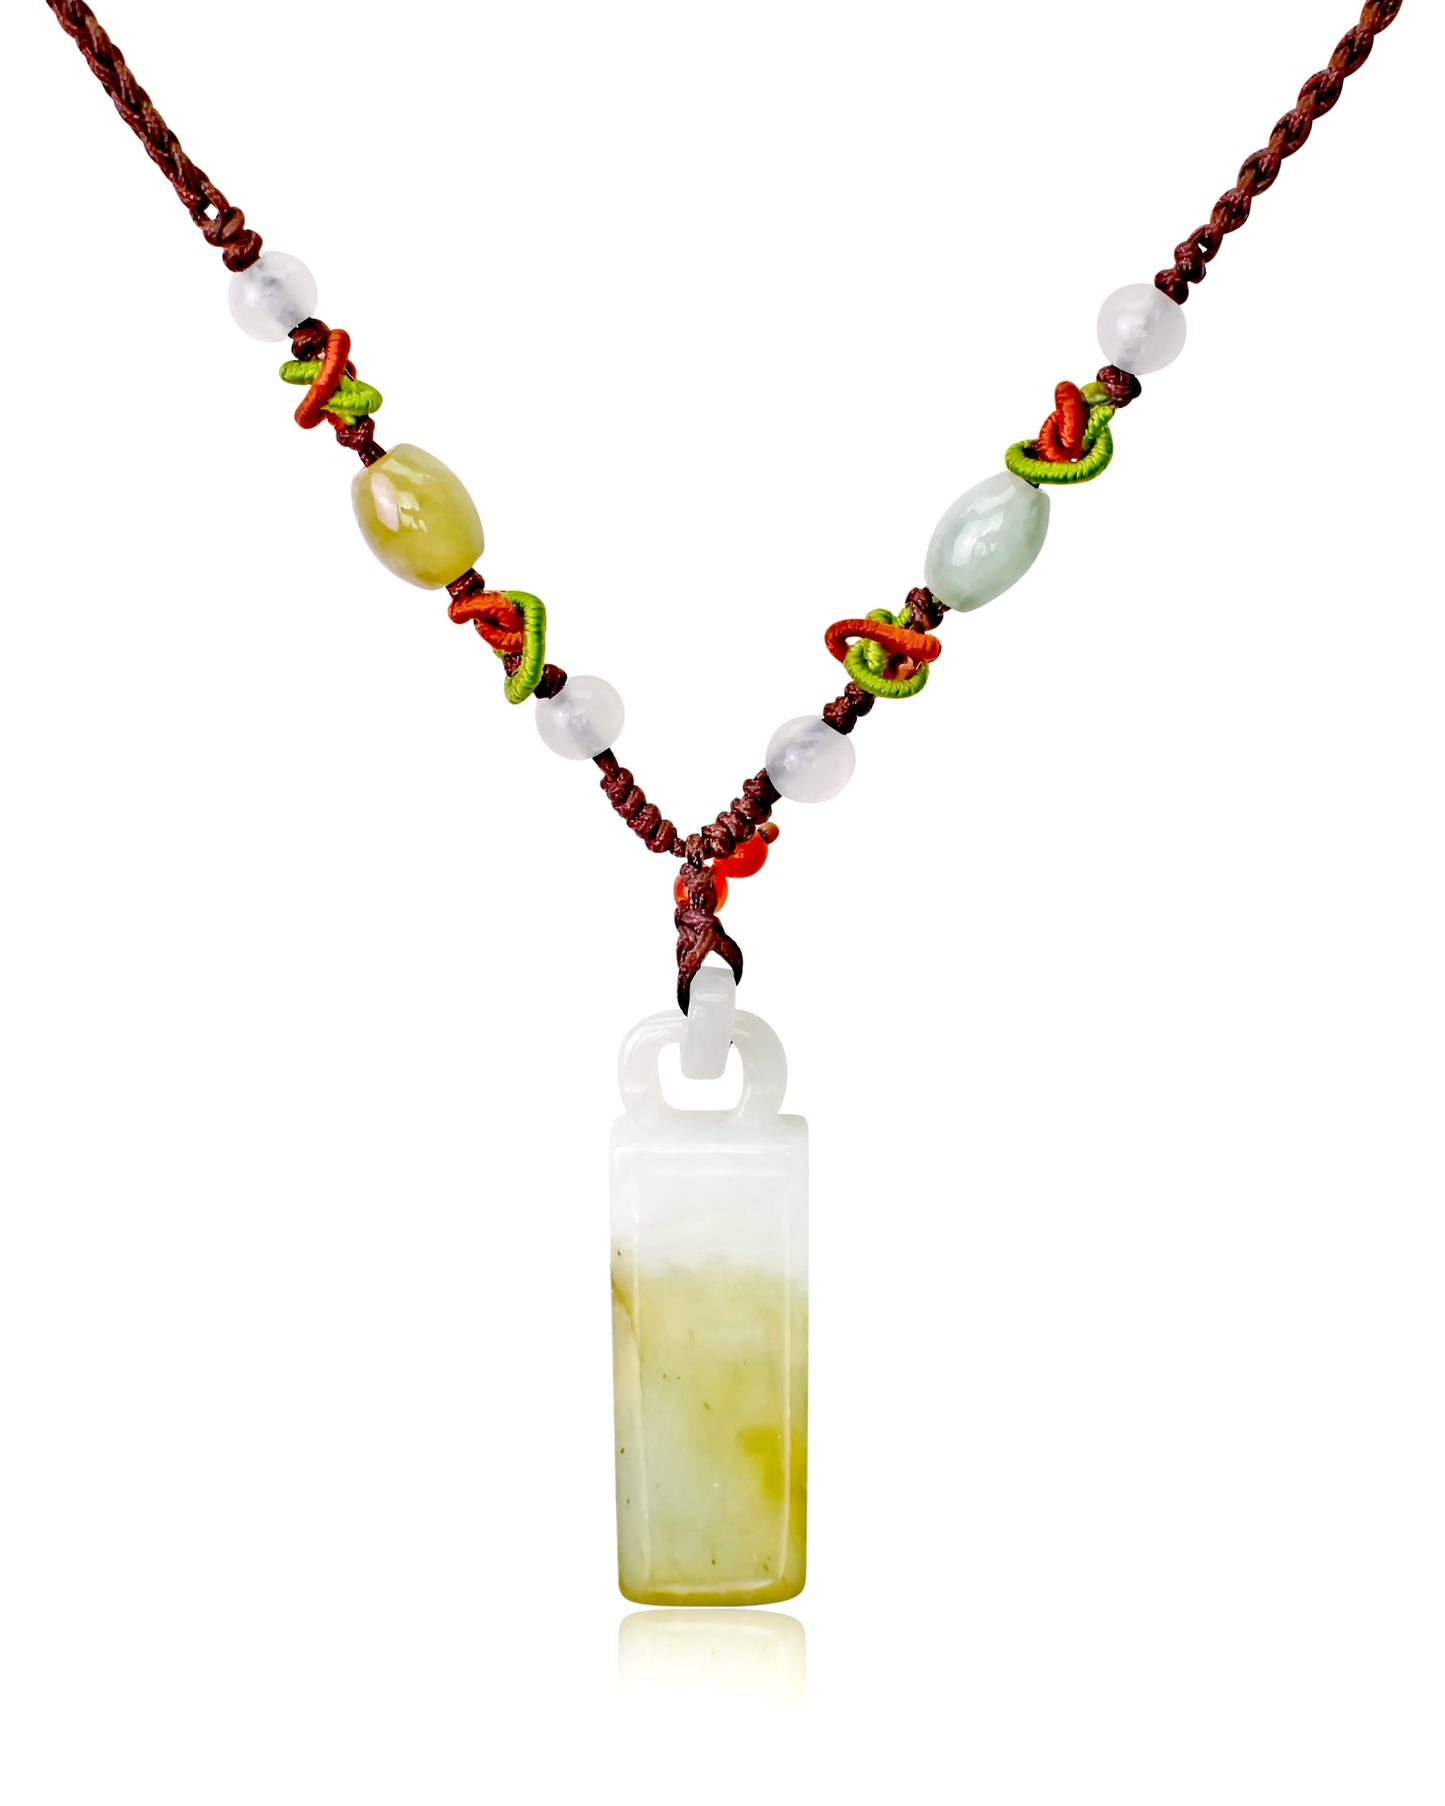 Add Stability to your Life with the Bar Jade Pendant Necklace made with Brown Cord